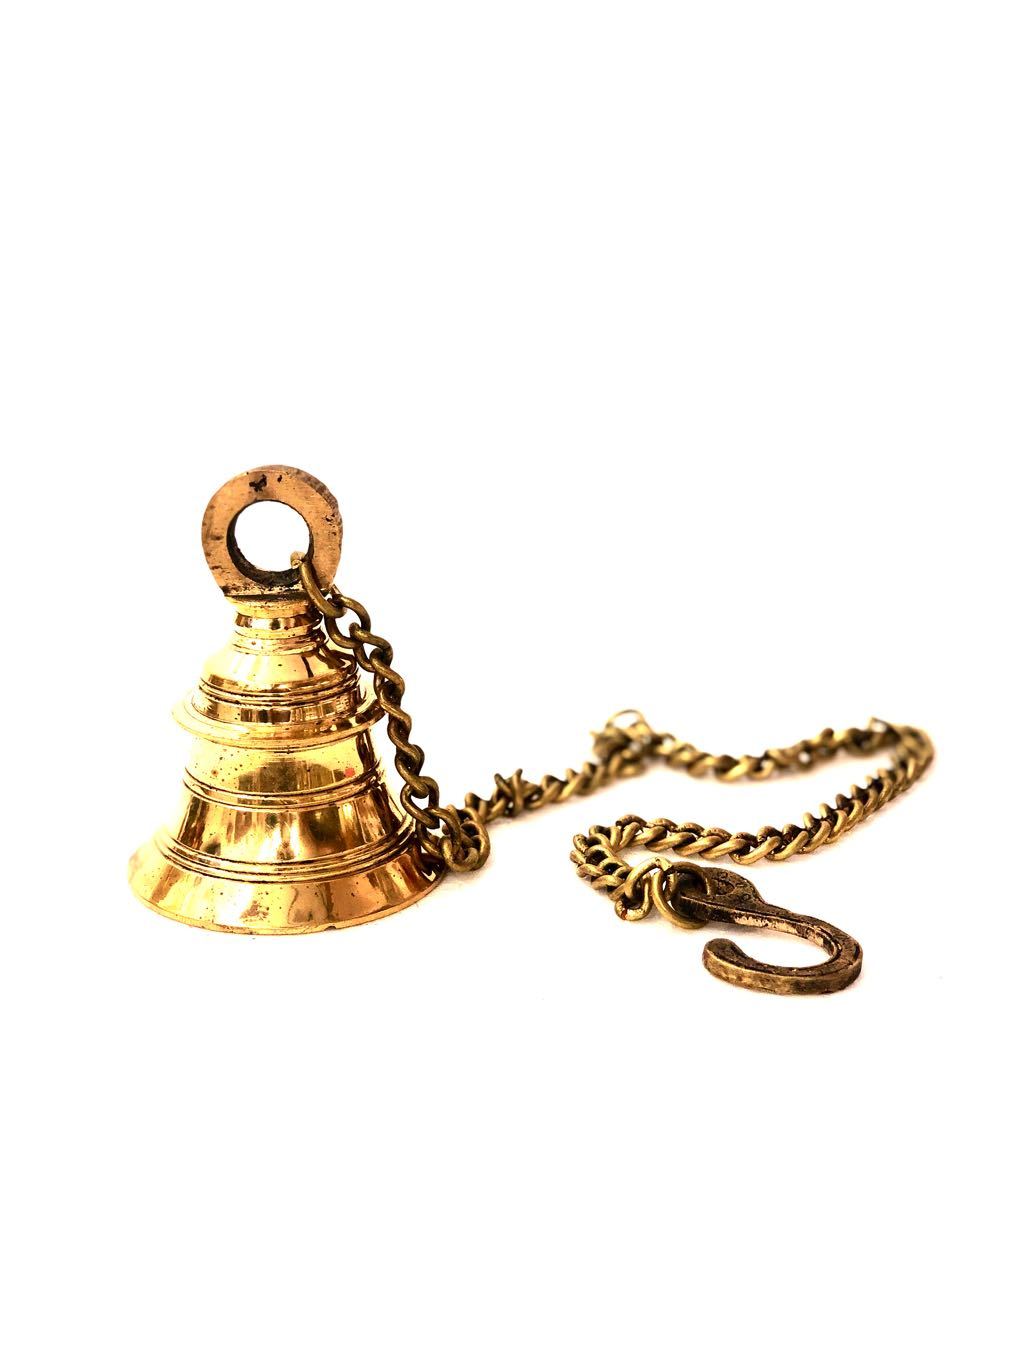 Hanging Brass Bells With Chain Exquisite Handcrafted Indian Art From Tamrapatra